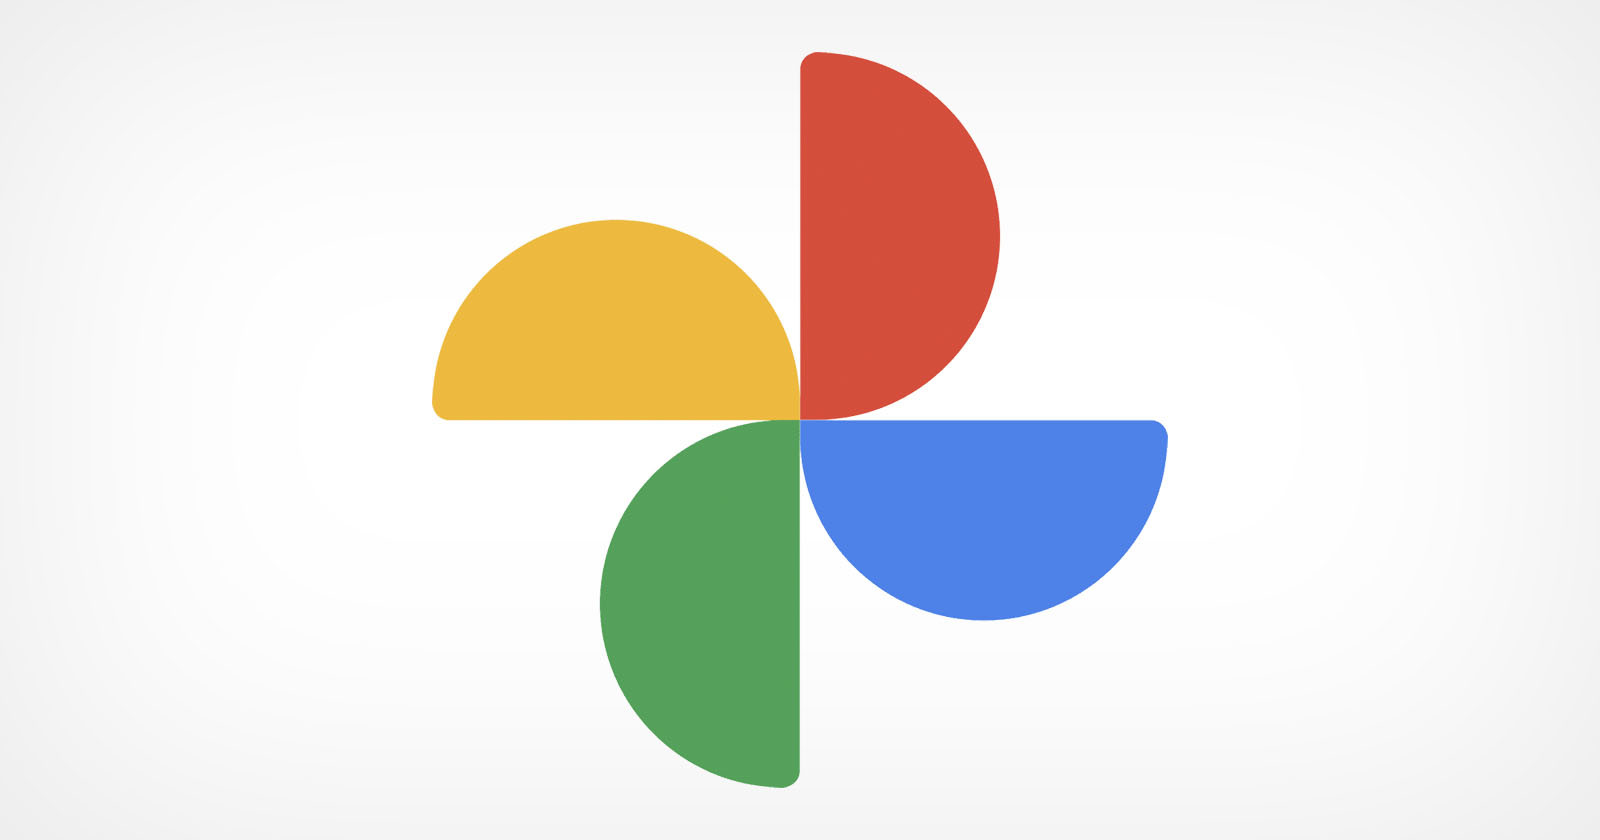 Google Photos iOS App Broke Yesterday, But a Fix is Available